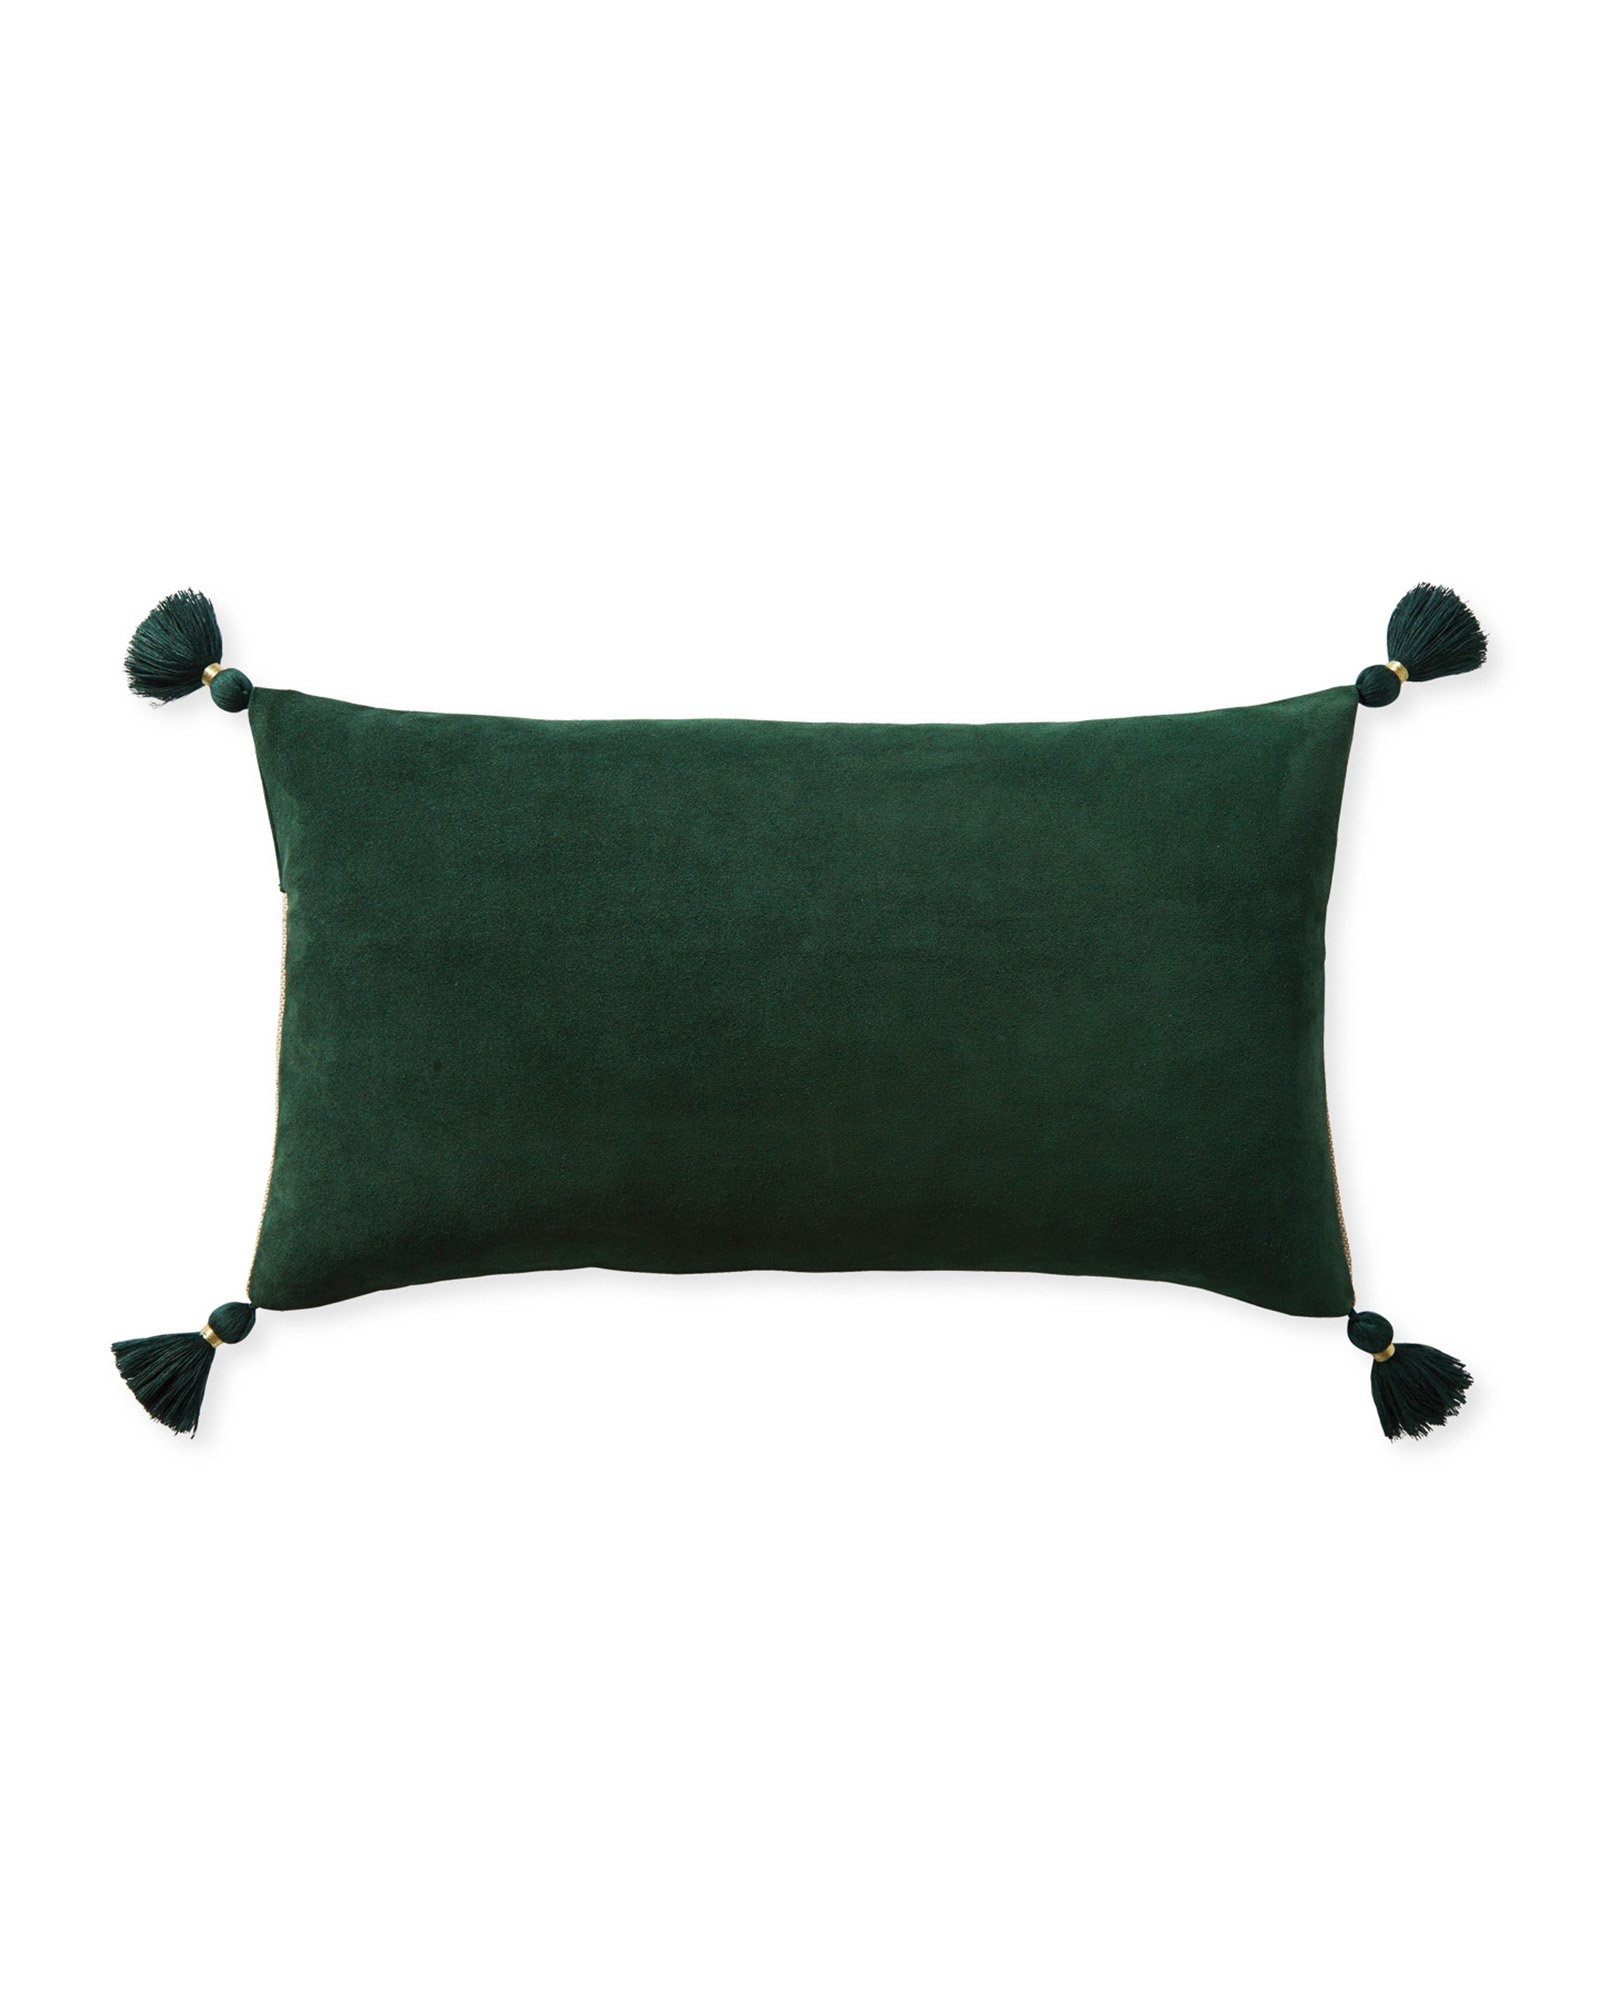 Suede Eva 12" x 21" Pillow Cover - Evergreen - Insert sold separately - Image 0